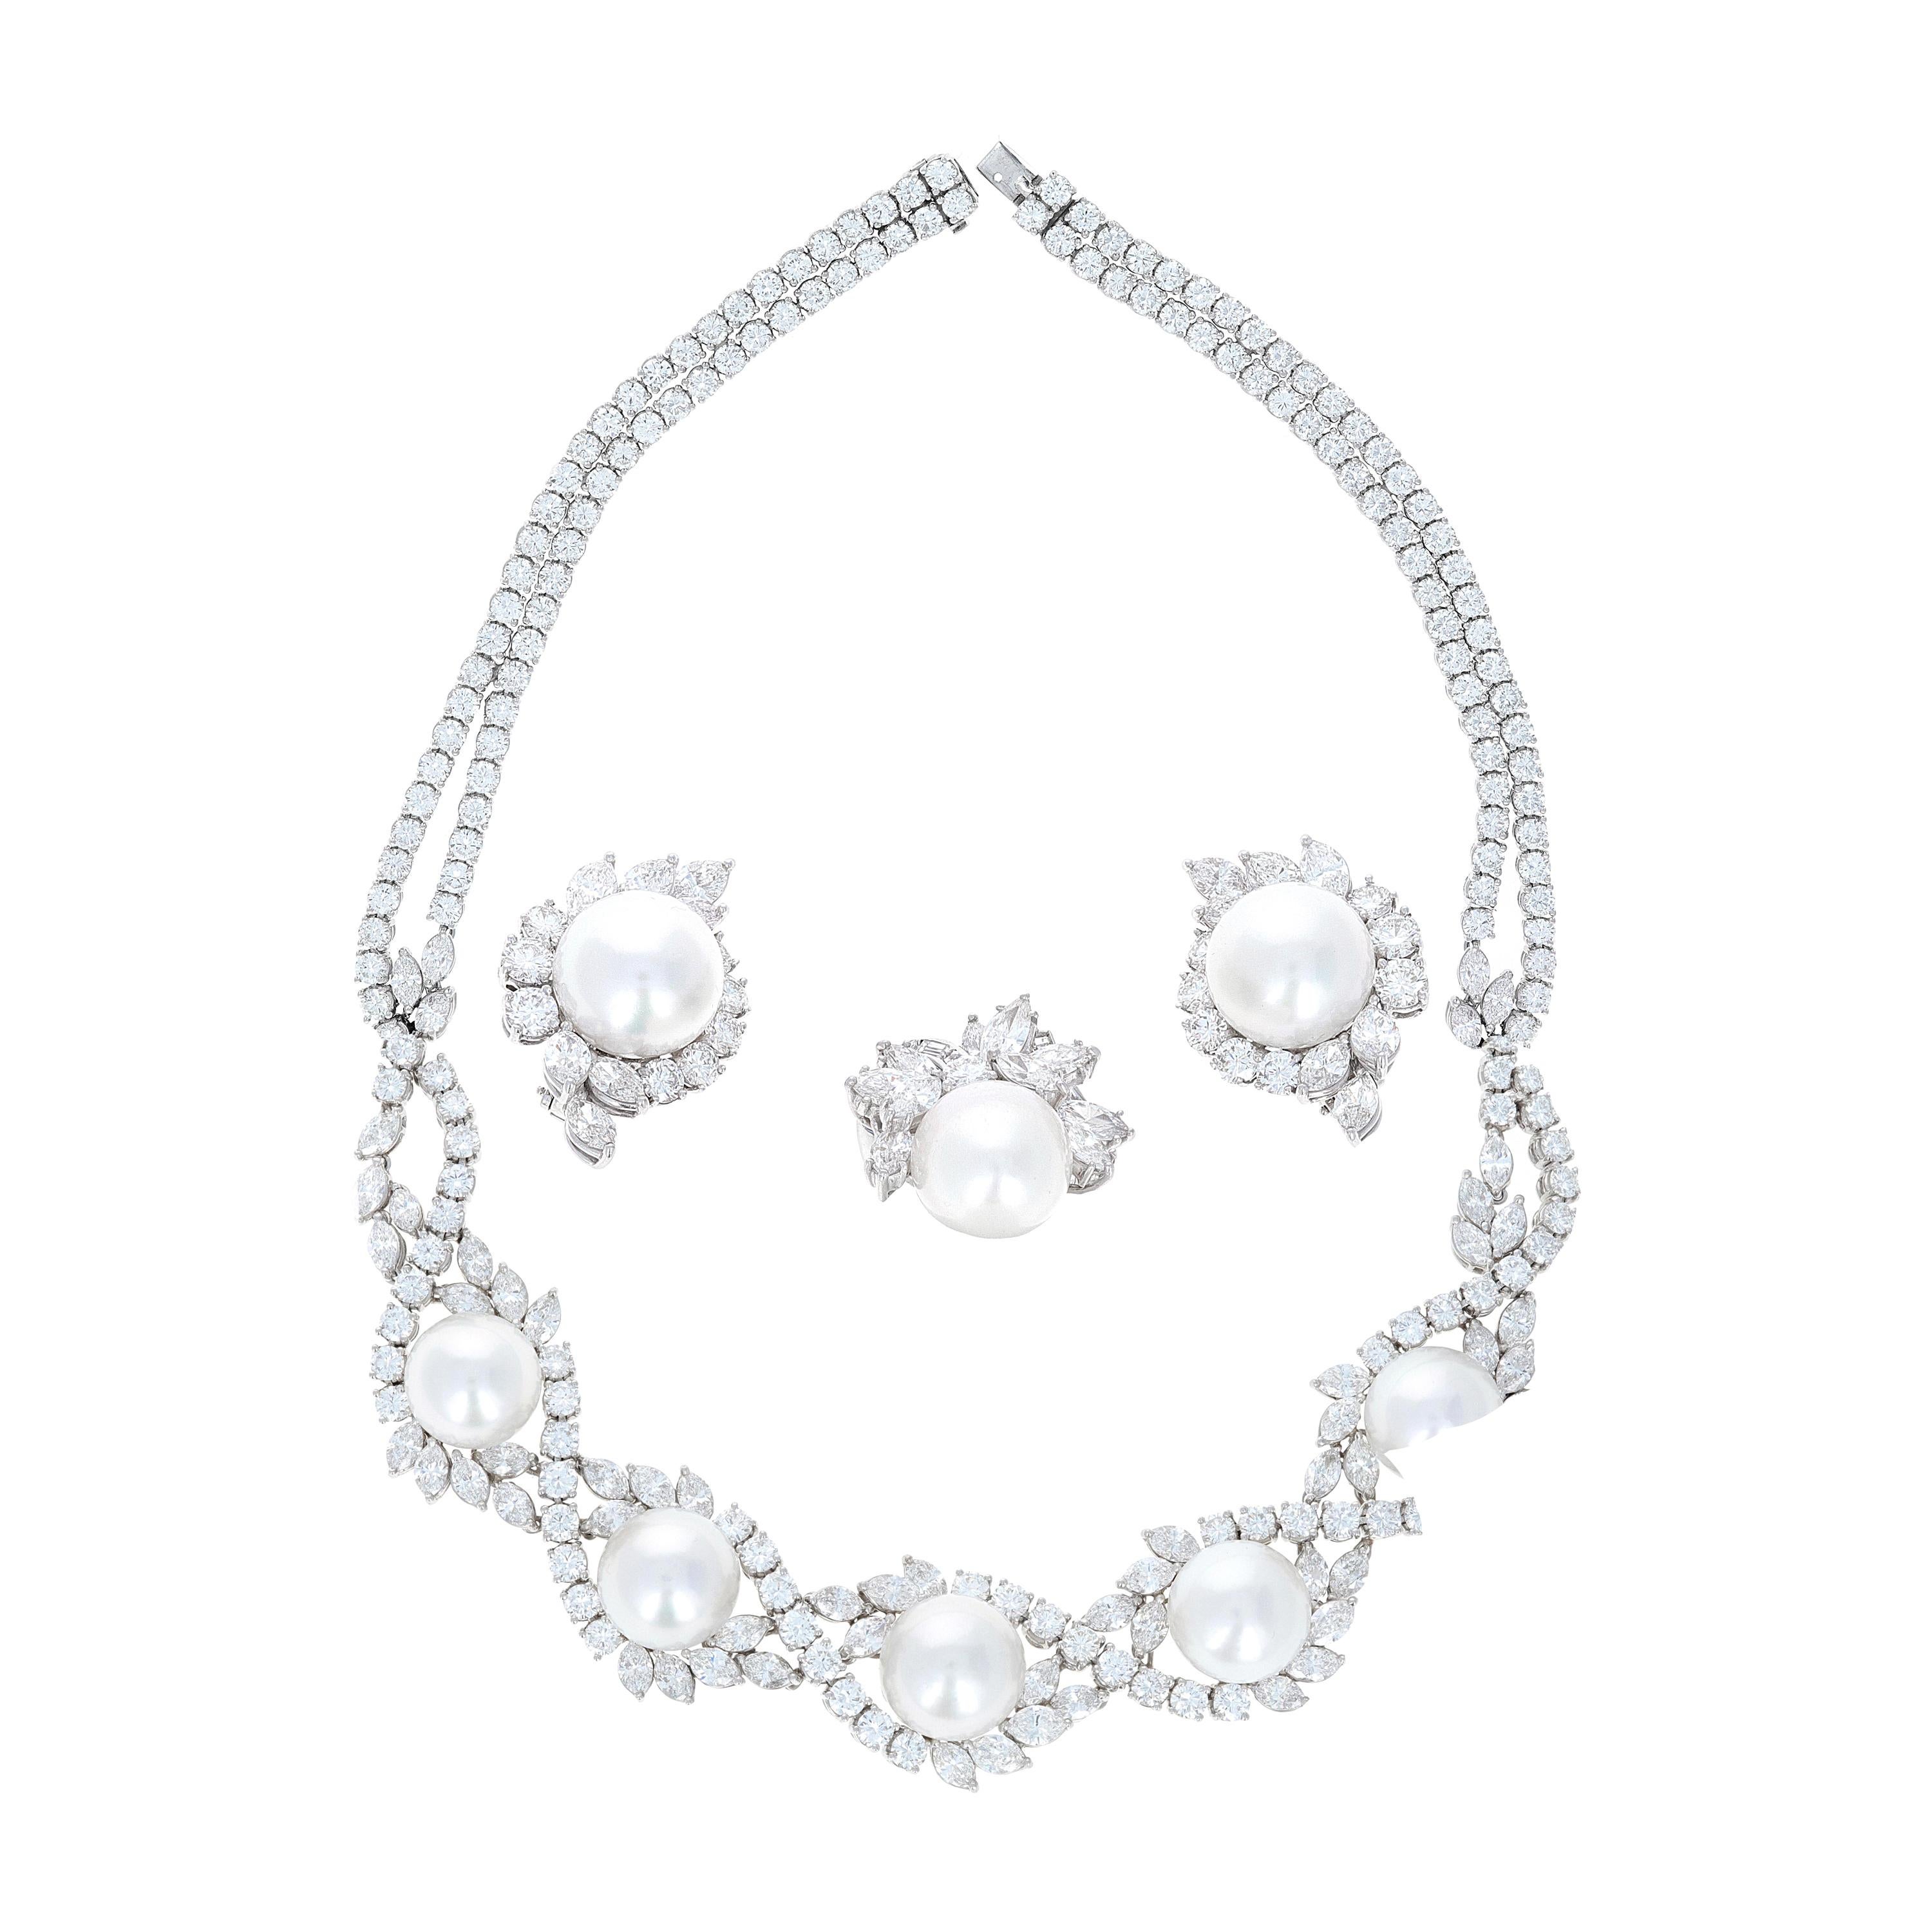 54.25 Carat Total Weight Diamond and Pearl Necklace, Earring and Ring Set